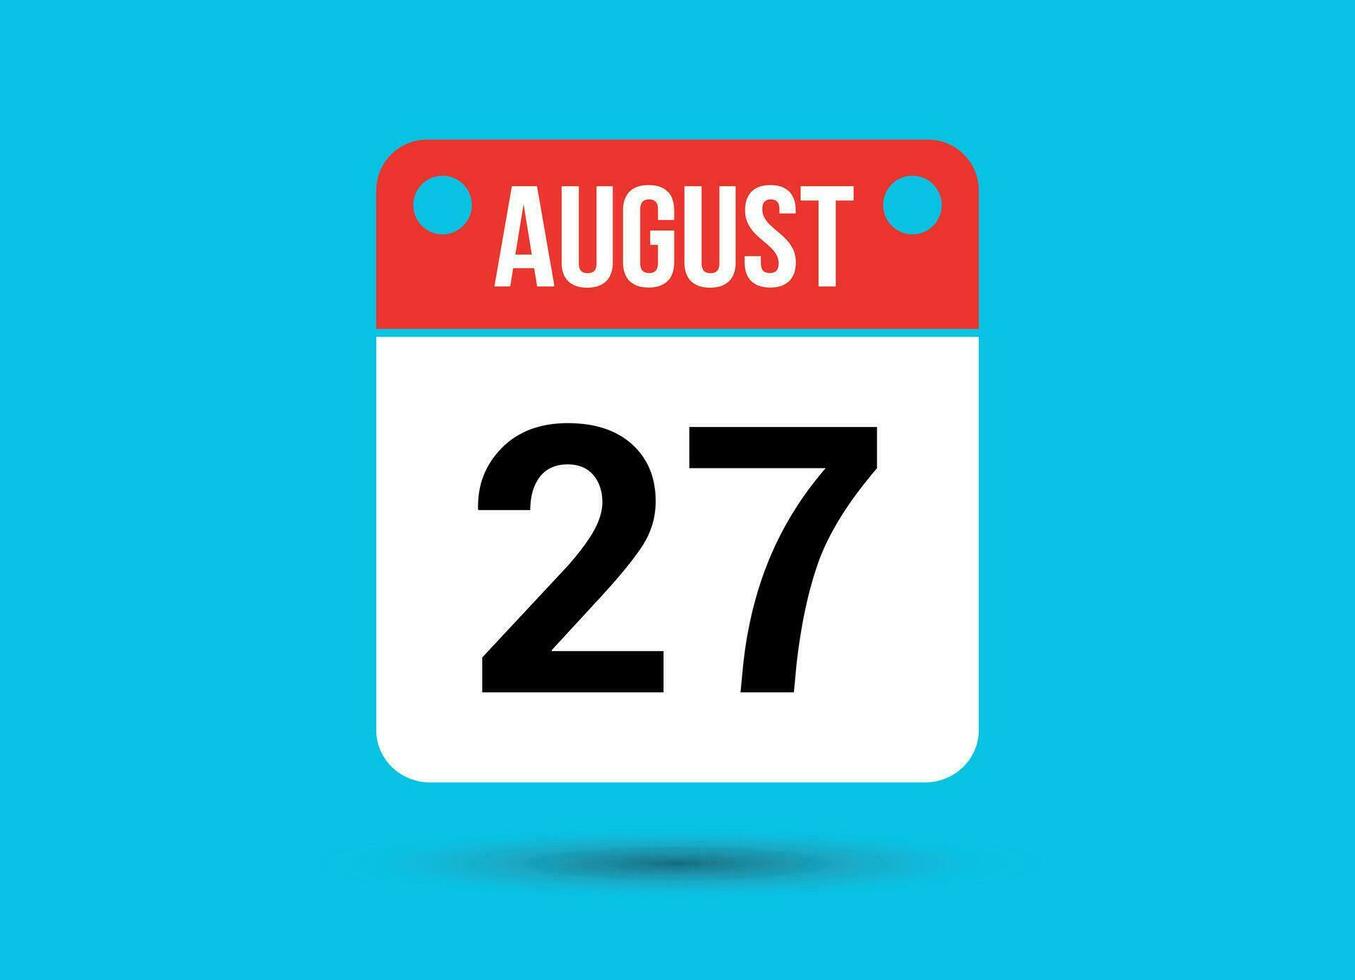 August 27 Calendar Date Flat Icon Day 27 Vector Illustration